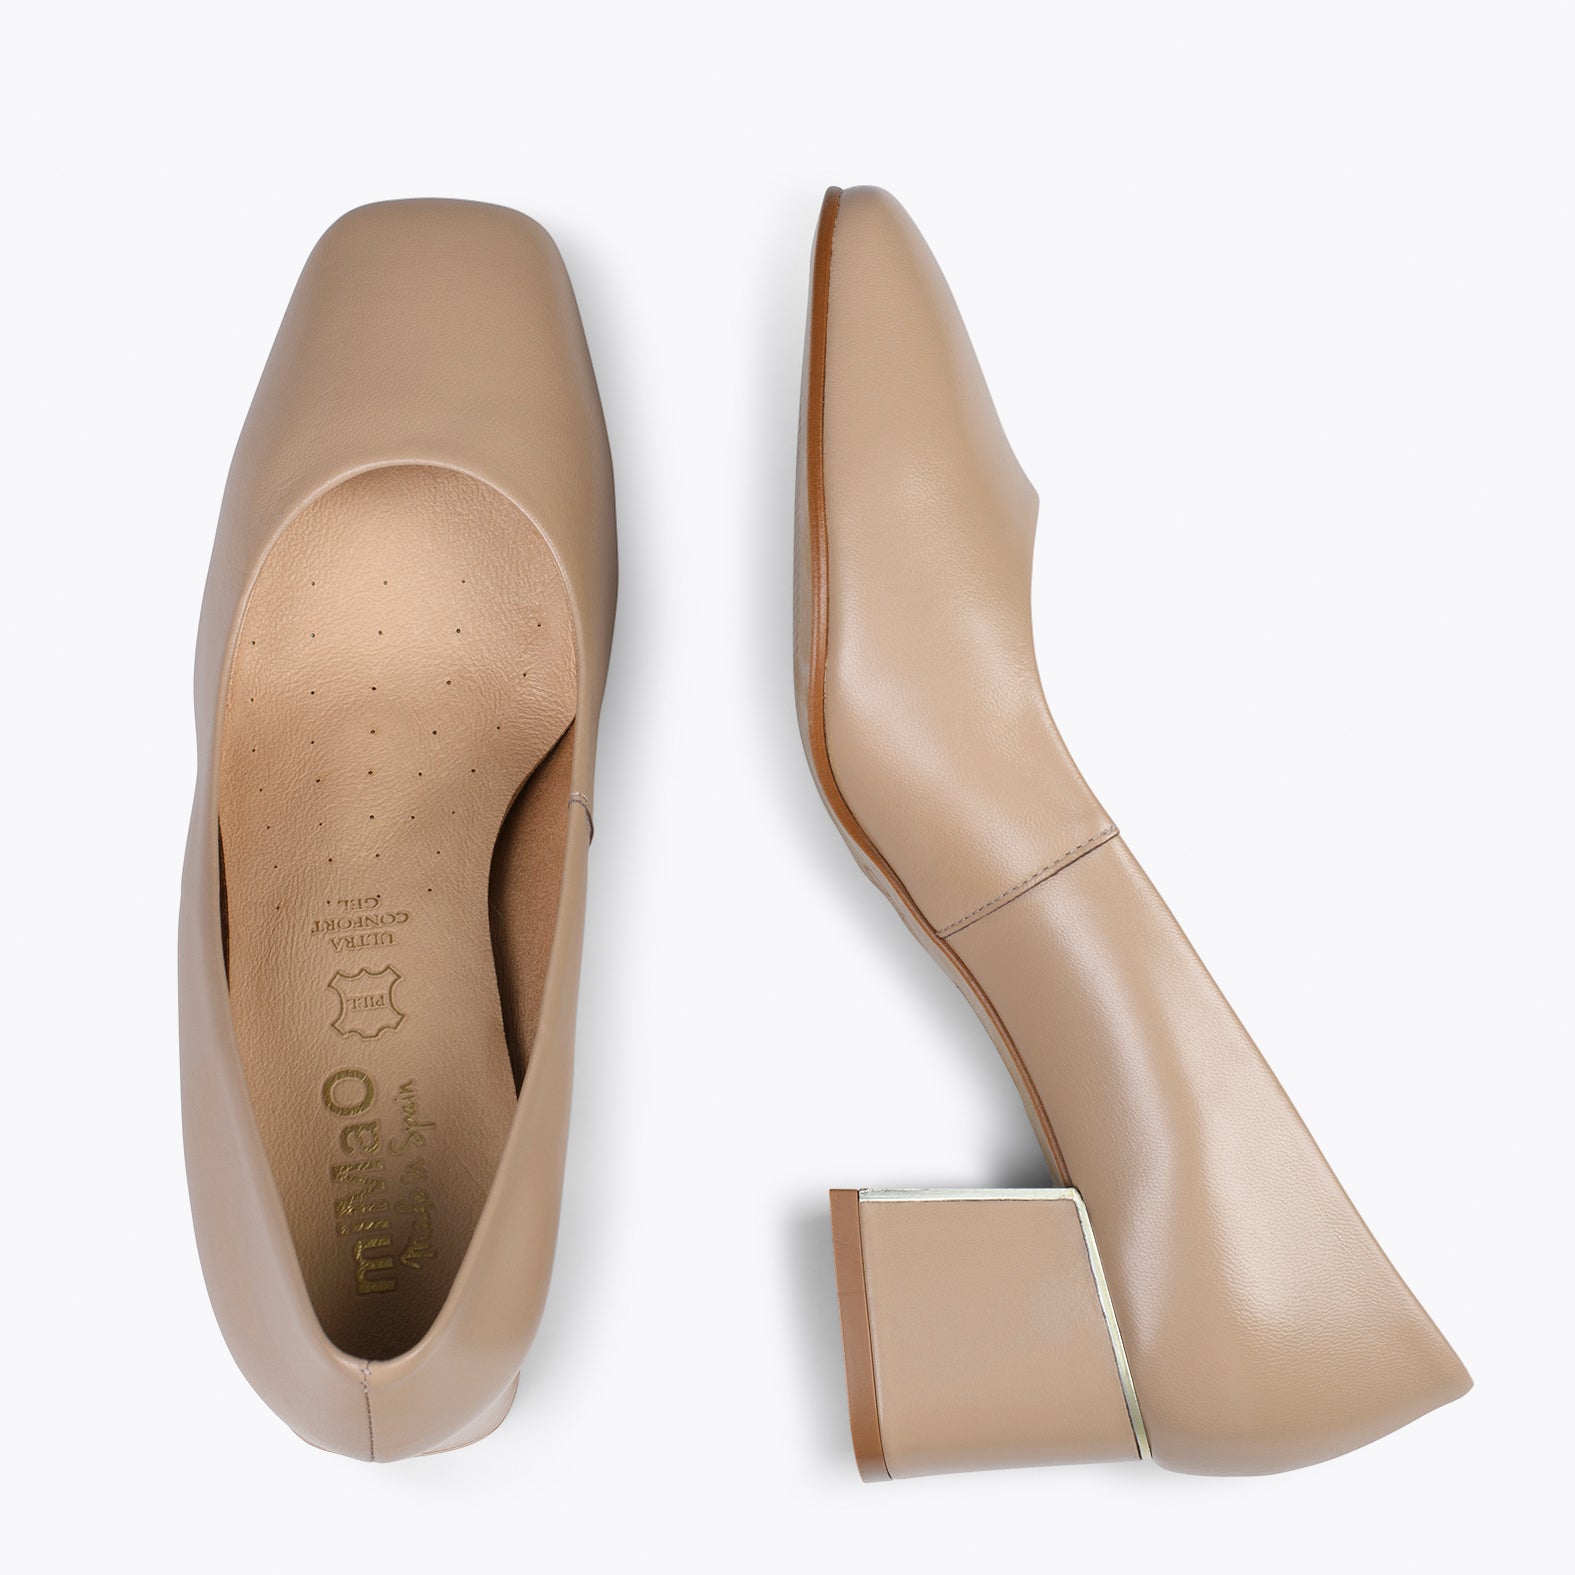 FEMME – BEIGE mid heel shoes with square toe